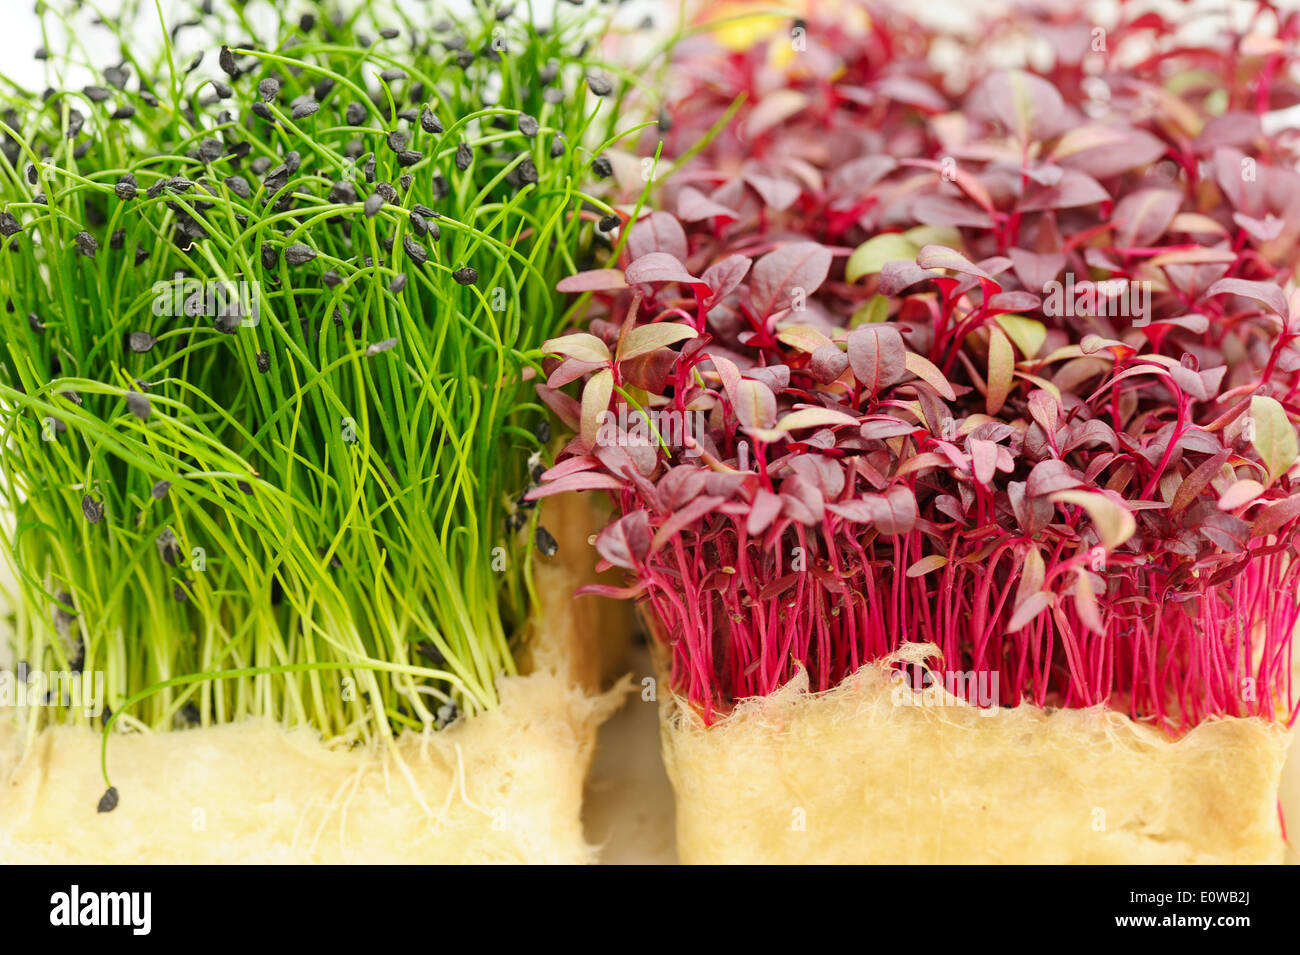 Cress varieties scarlet and rock chives on artificial substrate, close-up Stock Photo